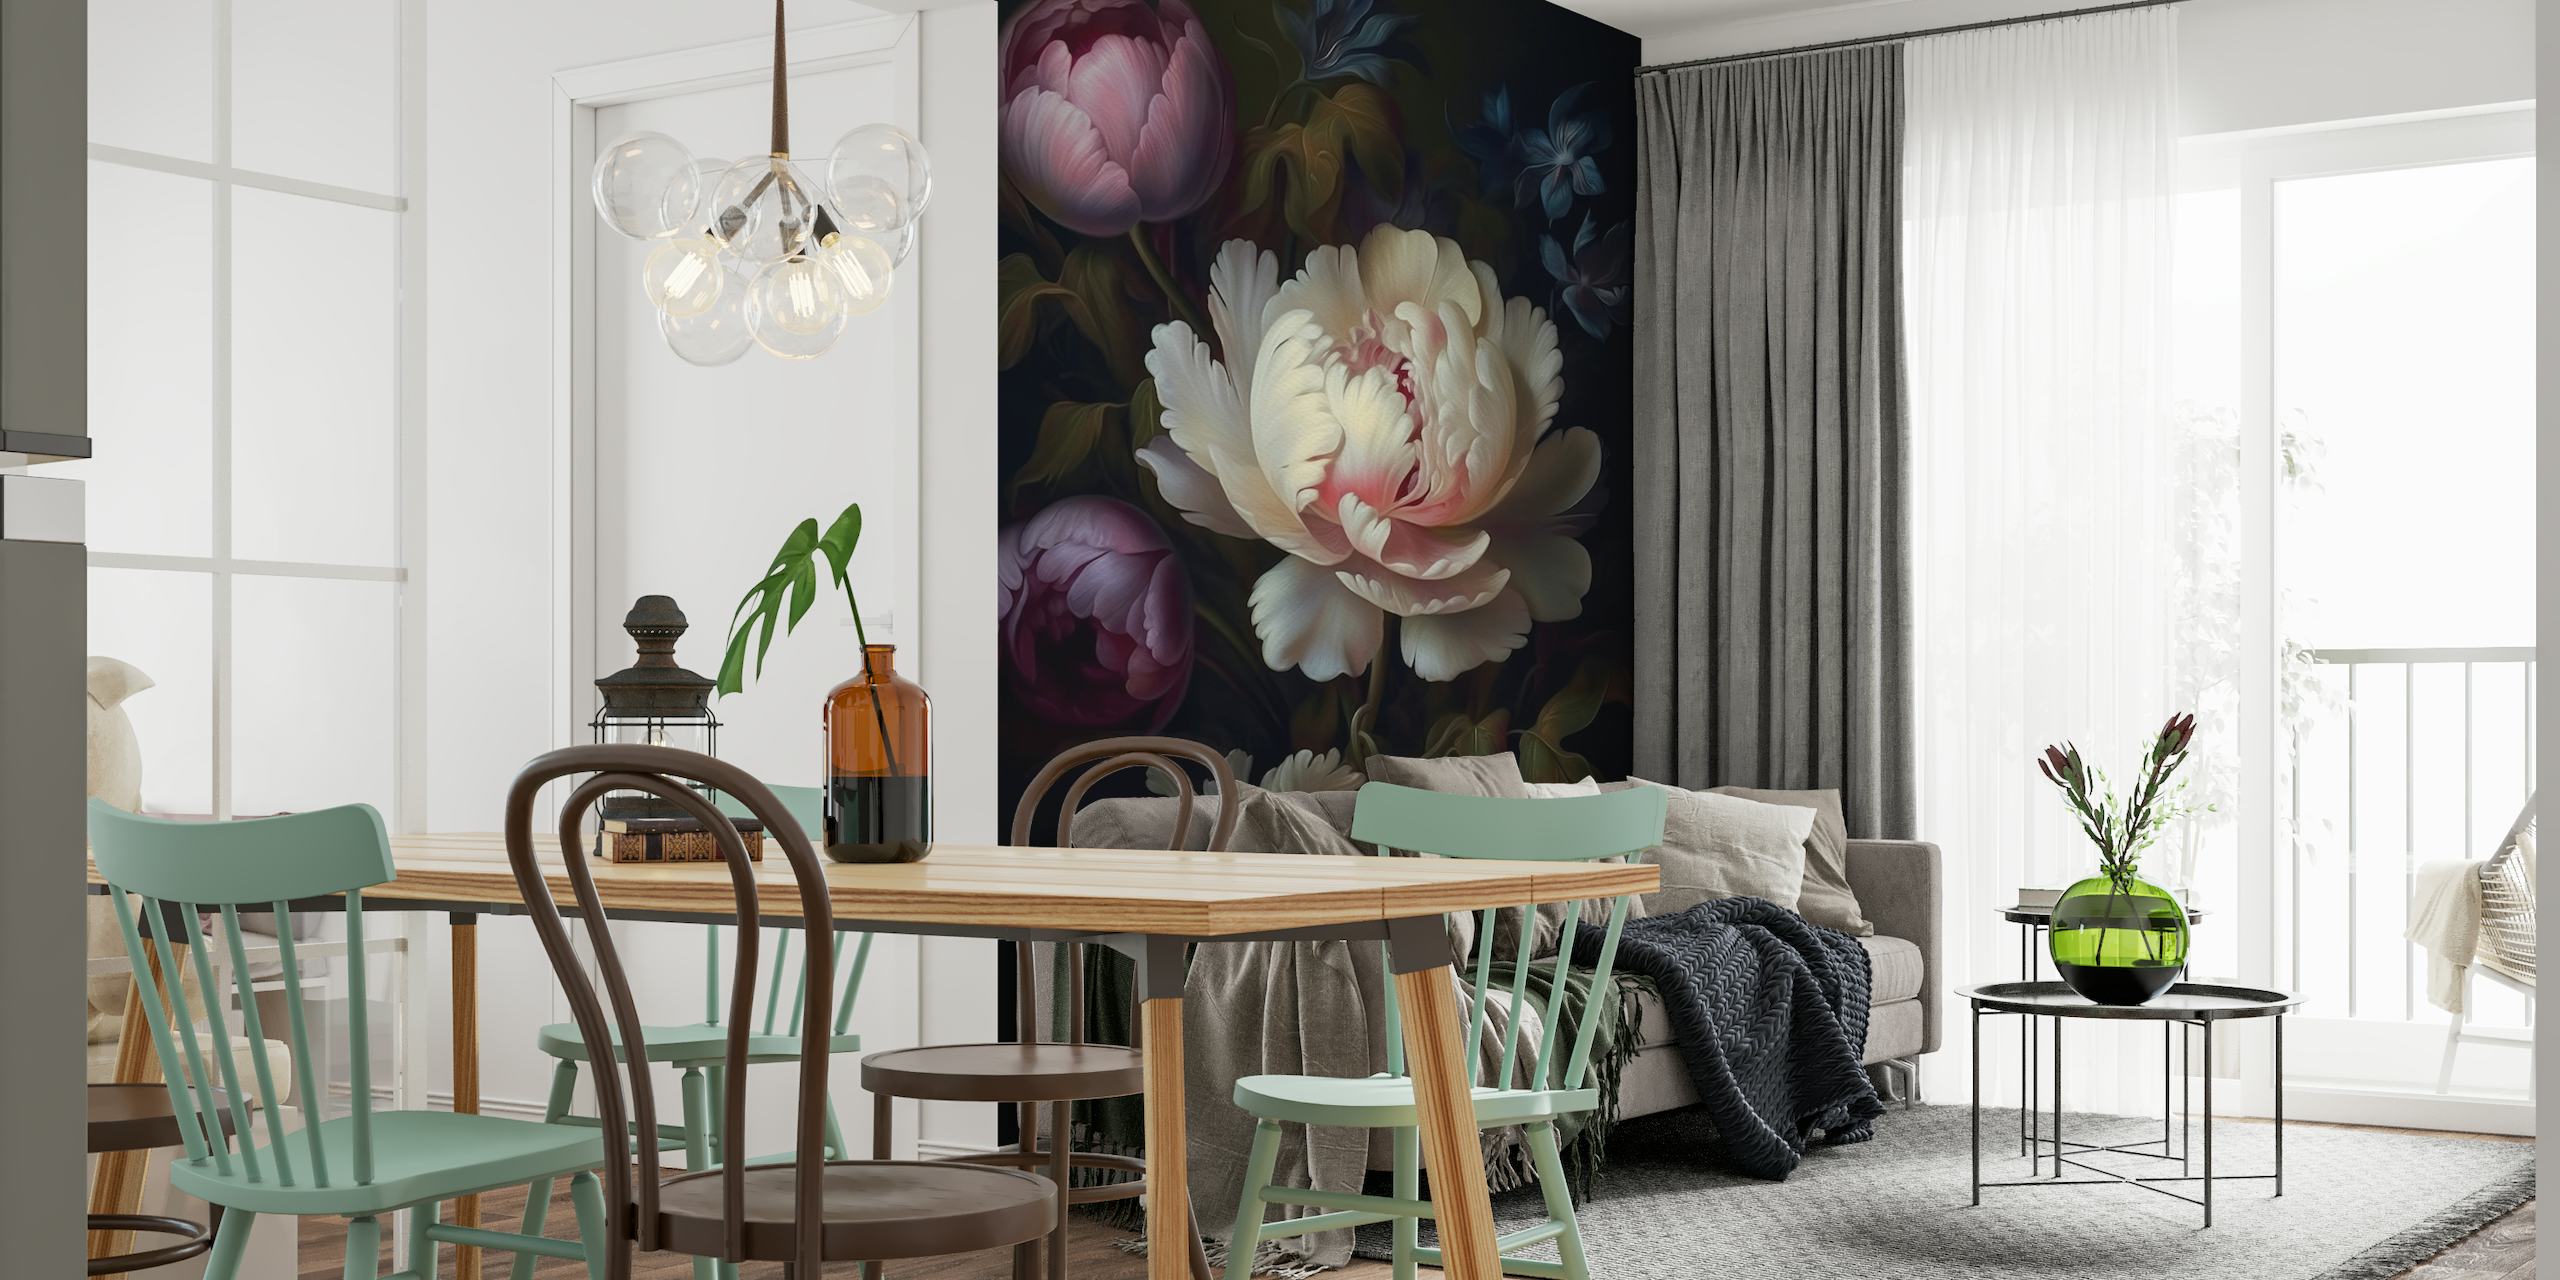 Dark floral baroque-style wall mural featuring opulent peonies against a moody night backdrop